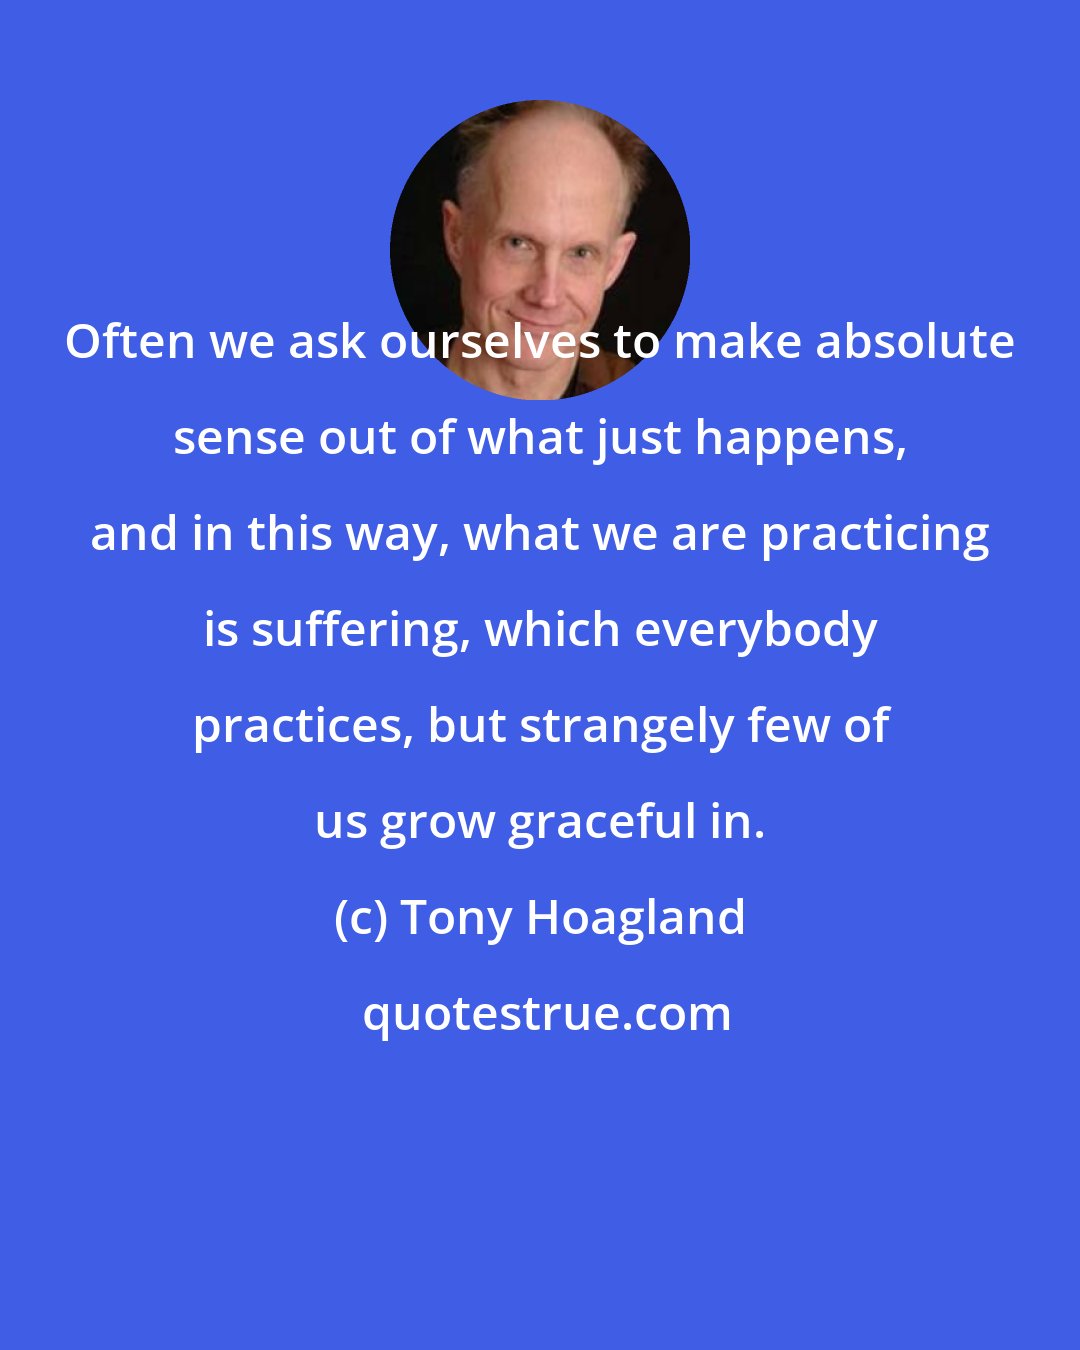 Tony Hoagland: Often we ask ourselves to make absolute sense out of what just happens, and in this way, what we are practicing is suffering, which everybody practices, but strangely few of us grow graceful in.